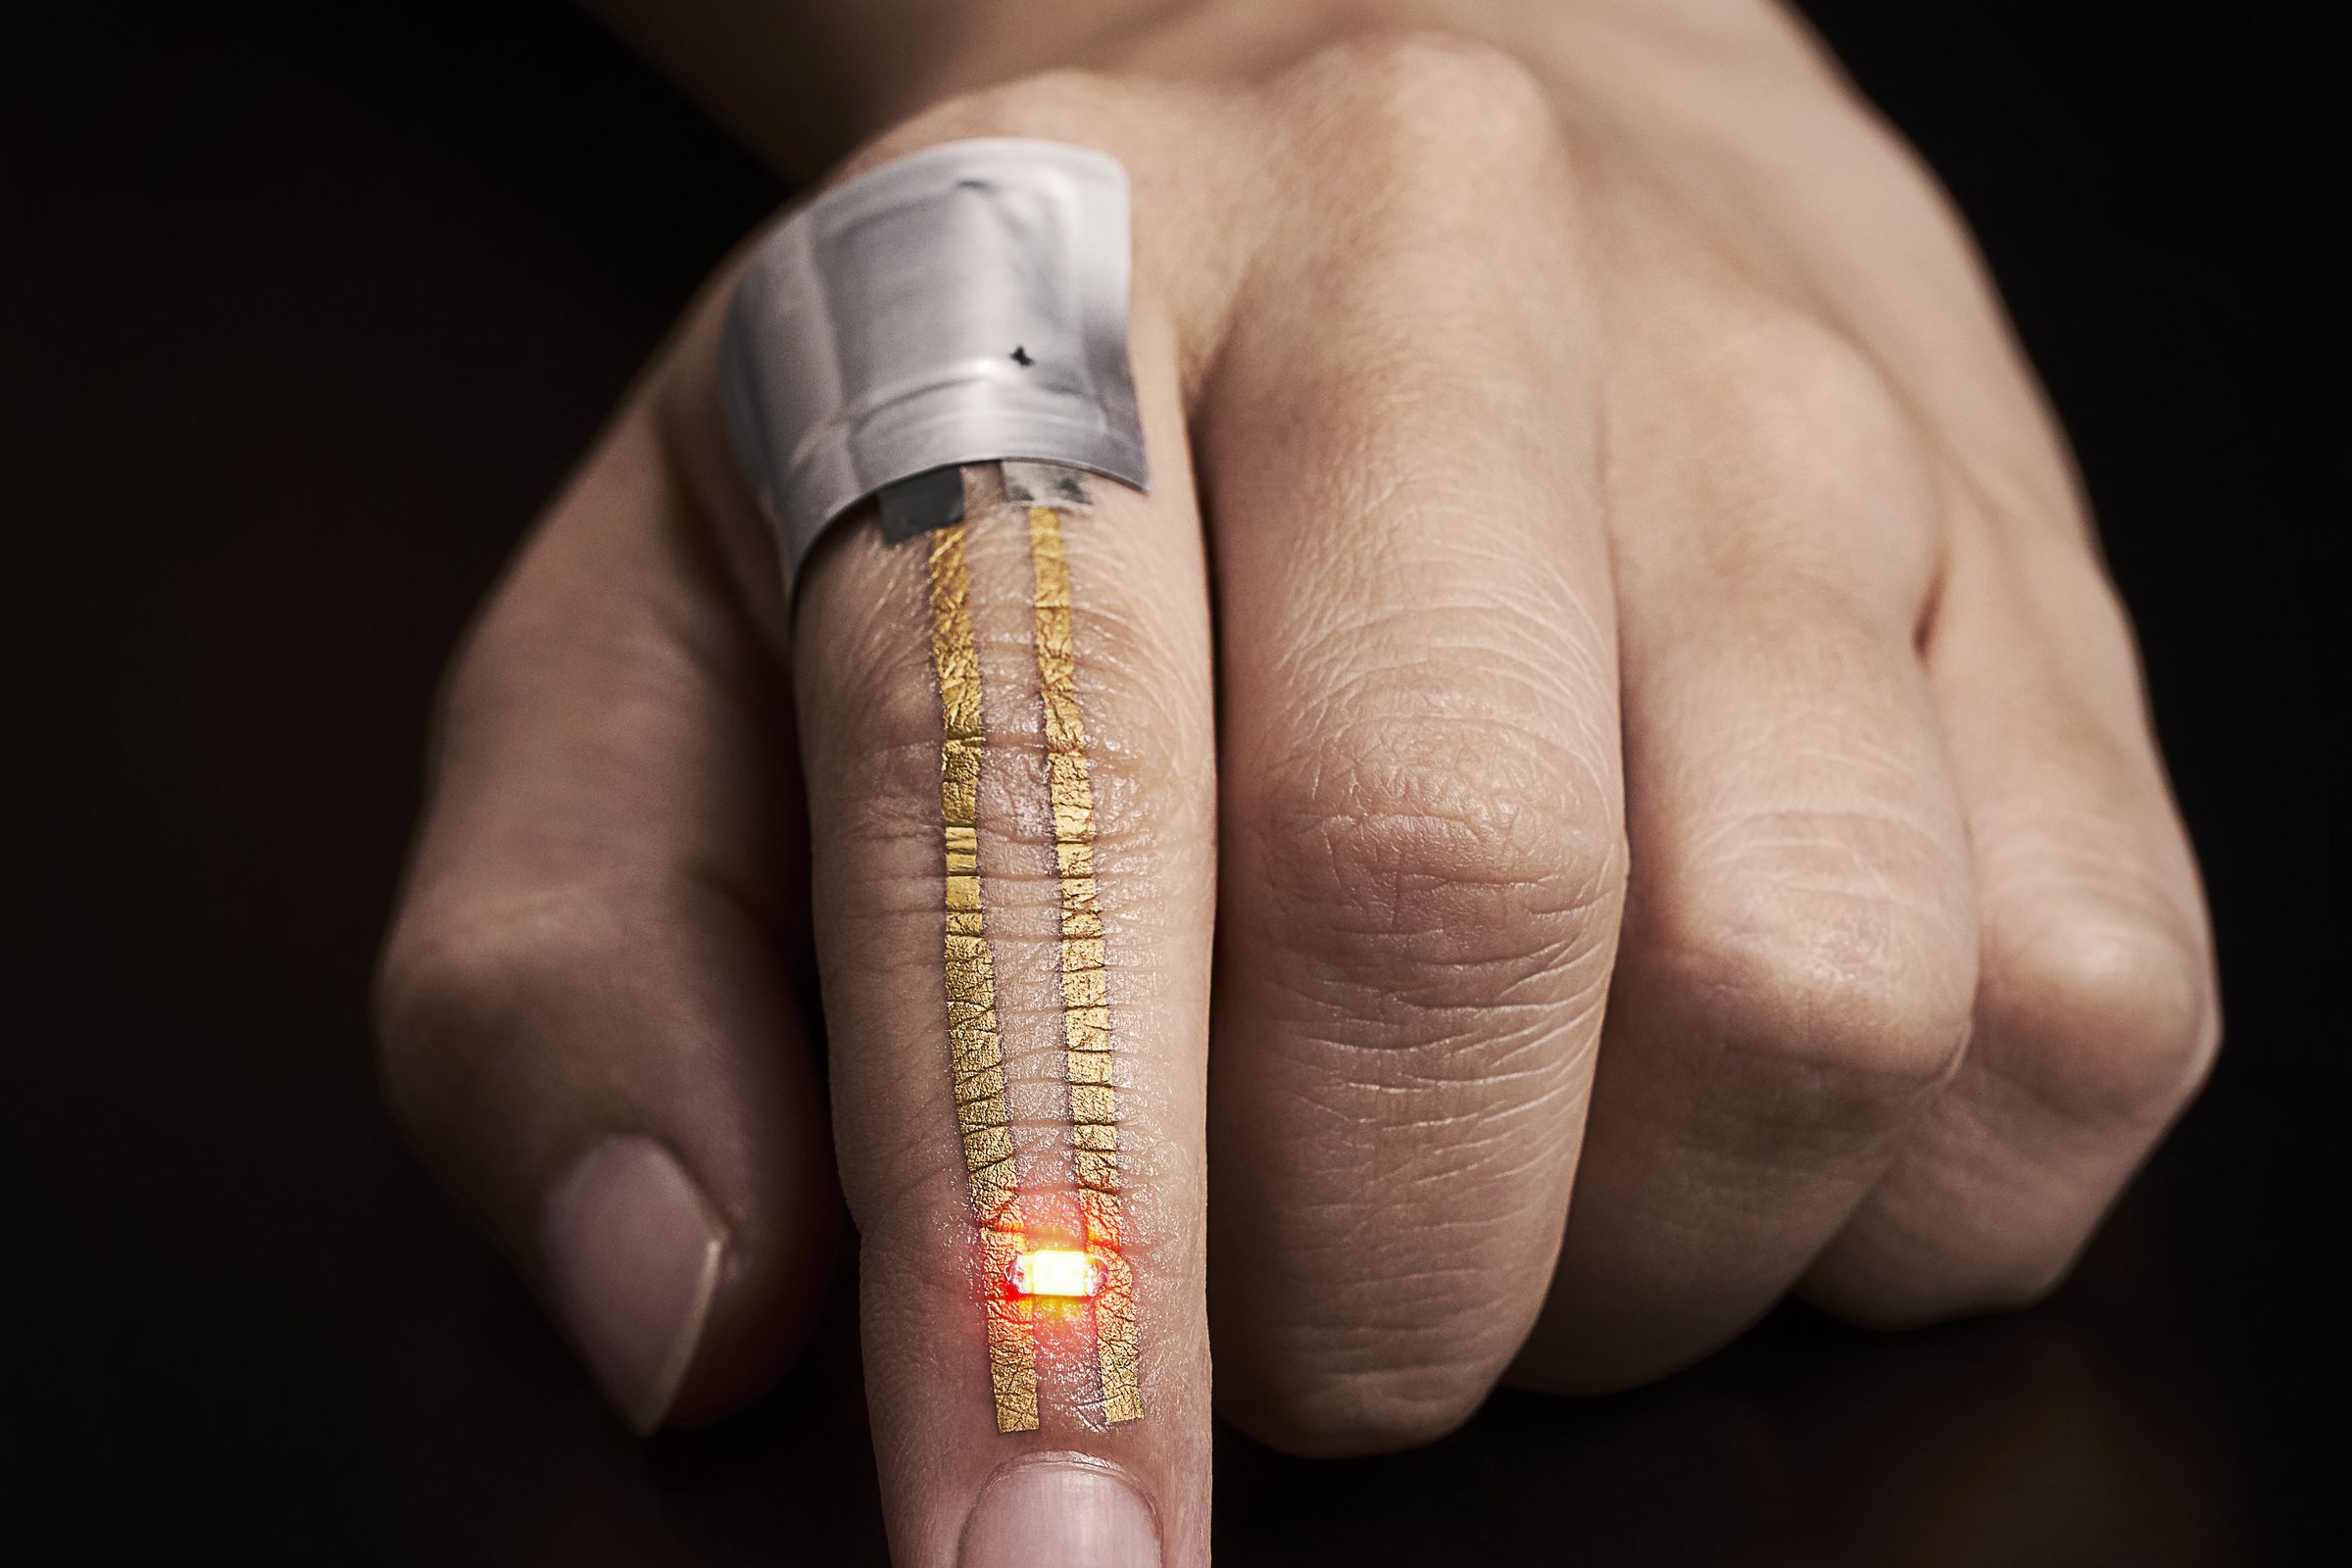 Index finger with gold nanomesh conductor. The electric current from a flexible battery placed near the knuckle flows through the conductor and powers the LED just below the fingernail. 